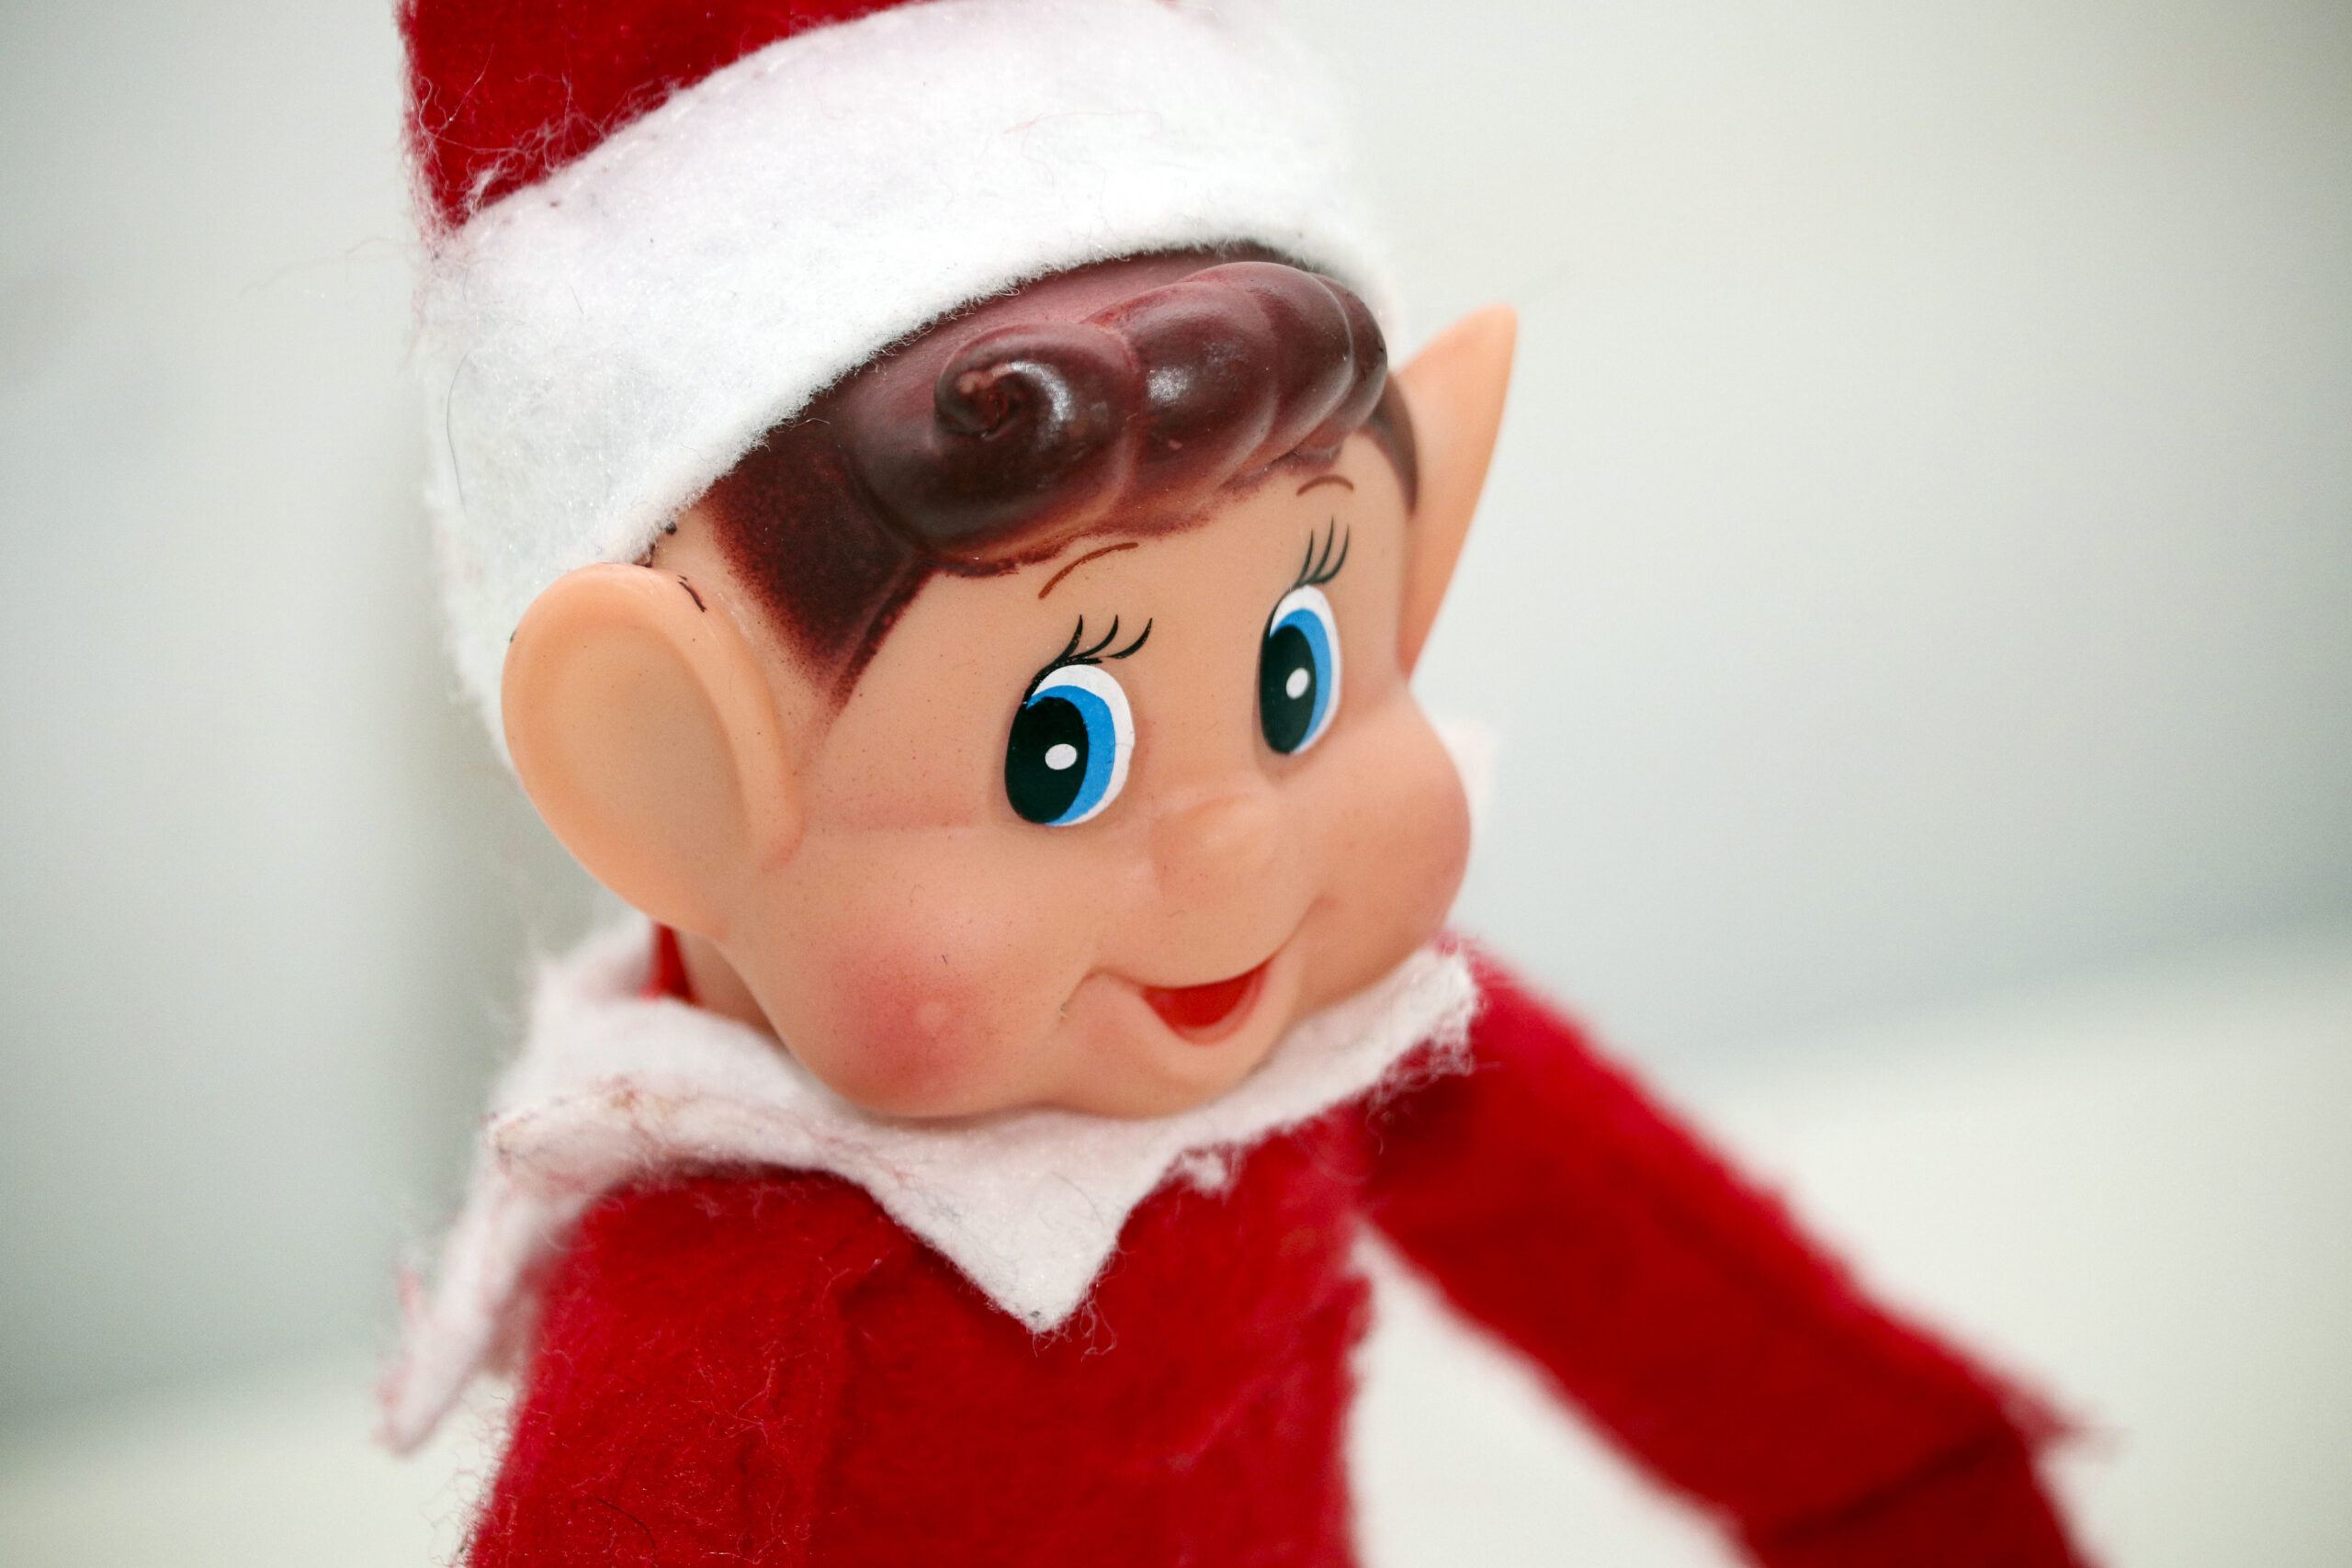 Get Your Elf on the Shelf a Doctor’s Note